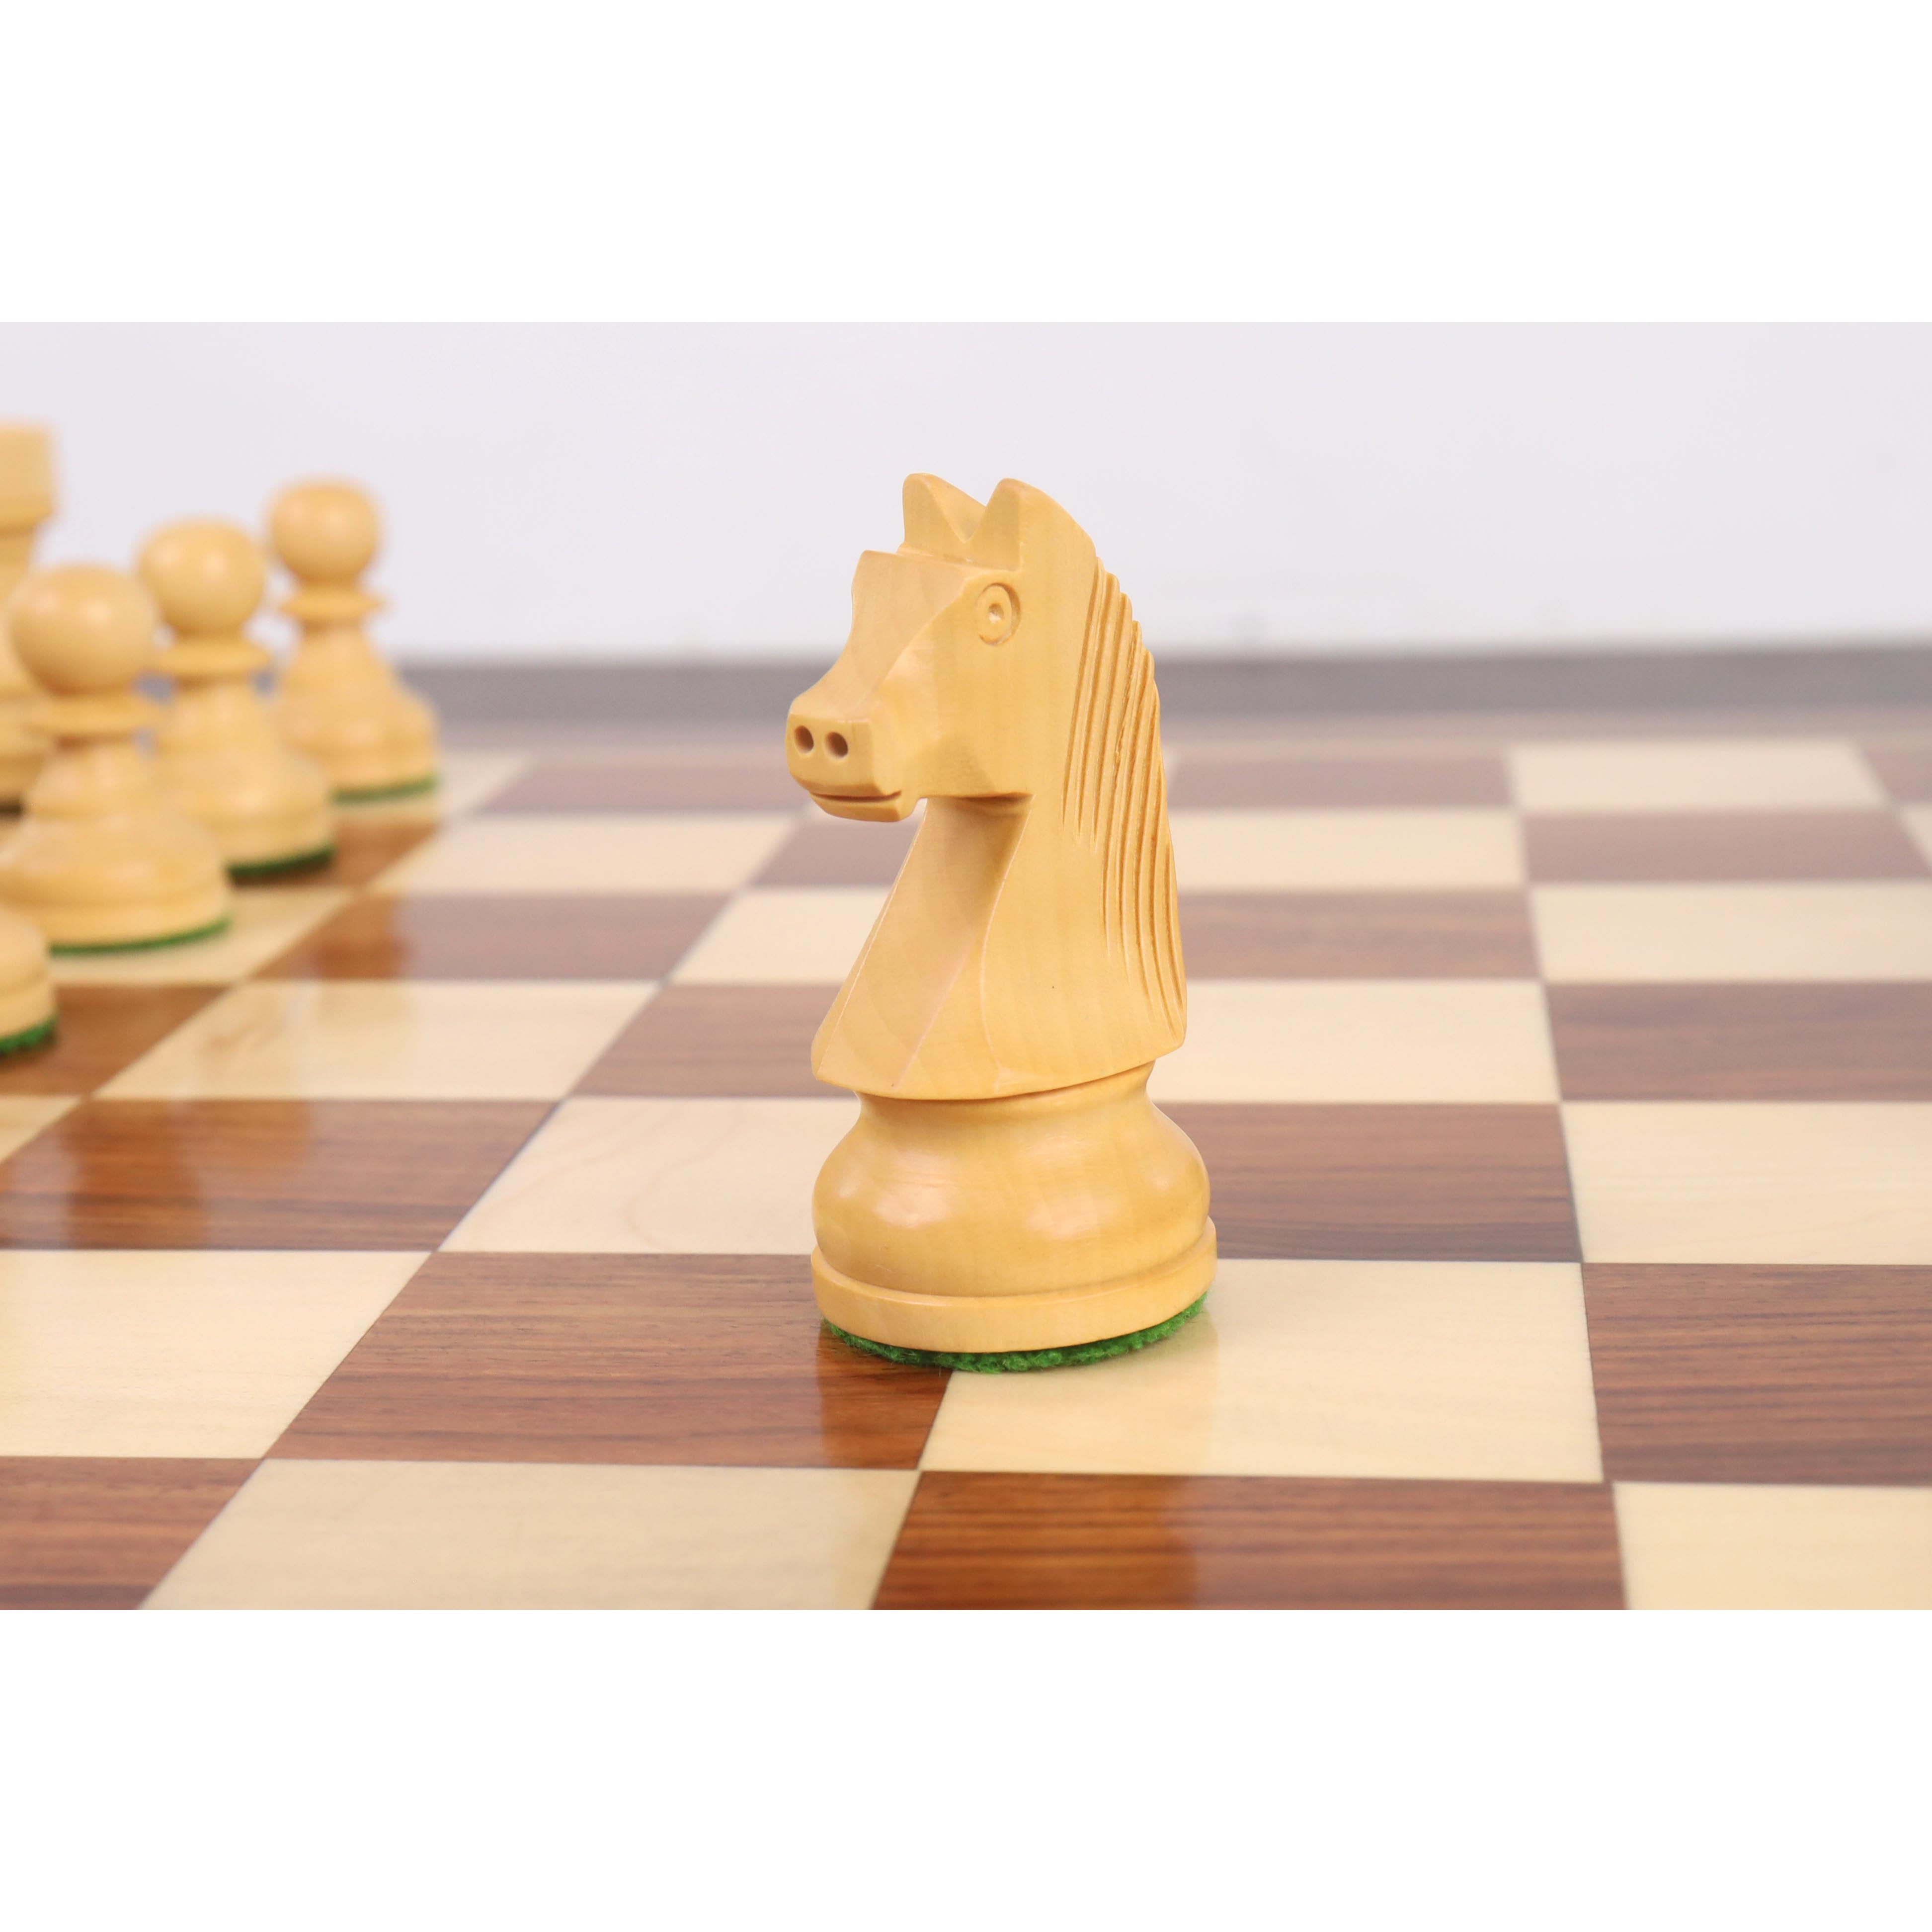 Combo of 3.3" Tournament Staunton Chess Set - Pieces in Golden Rosewood with Board and Box